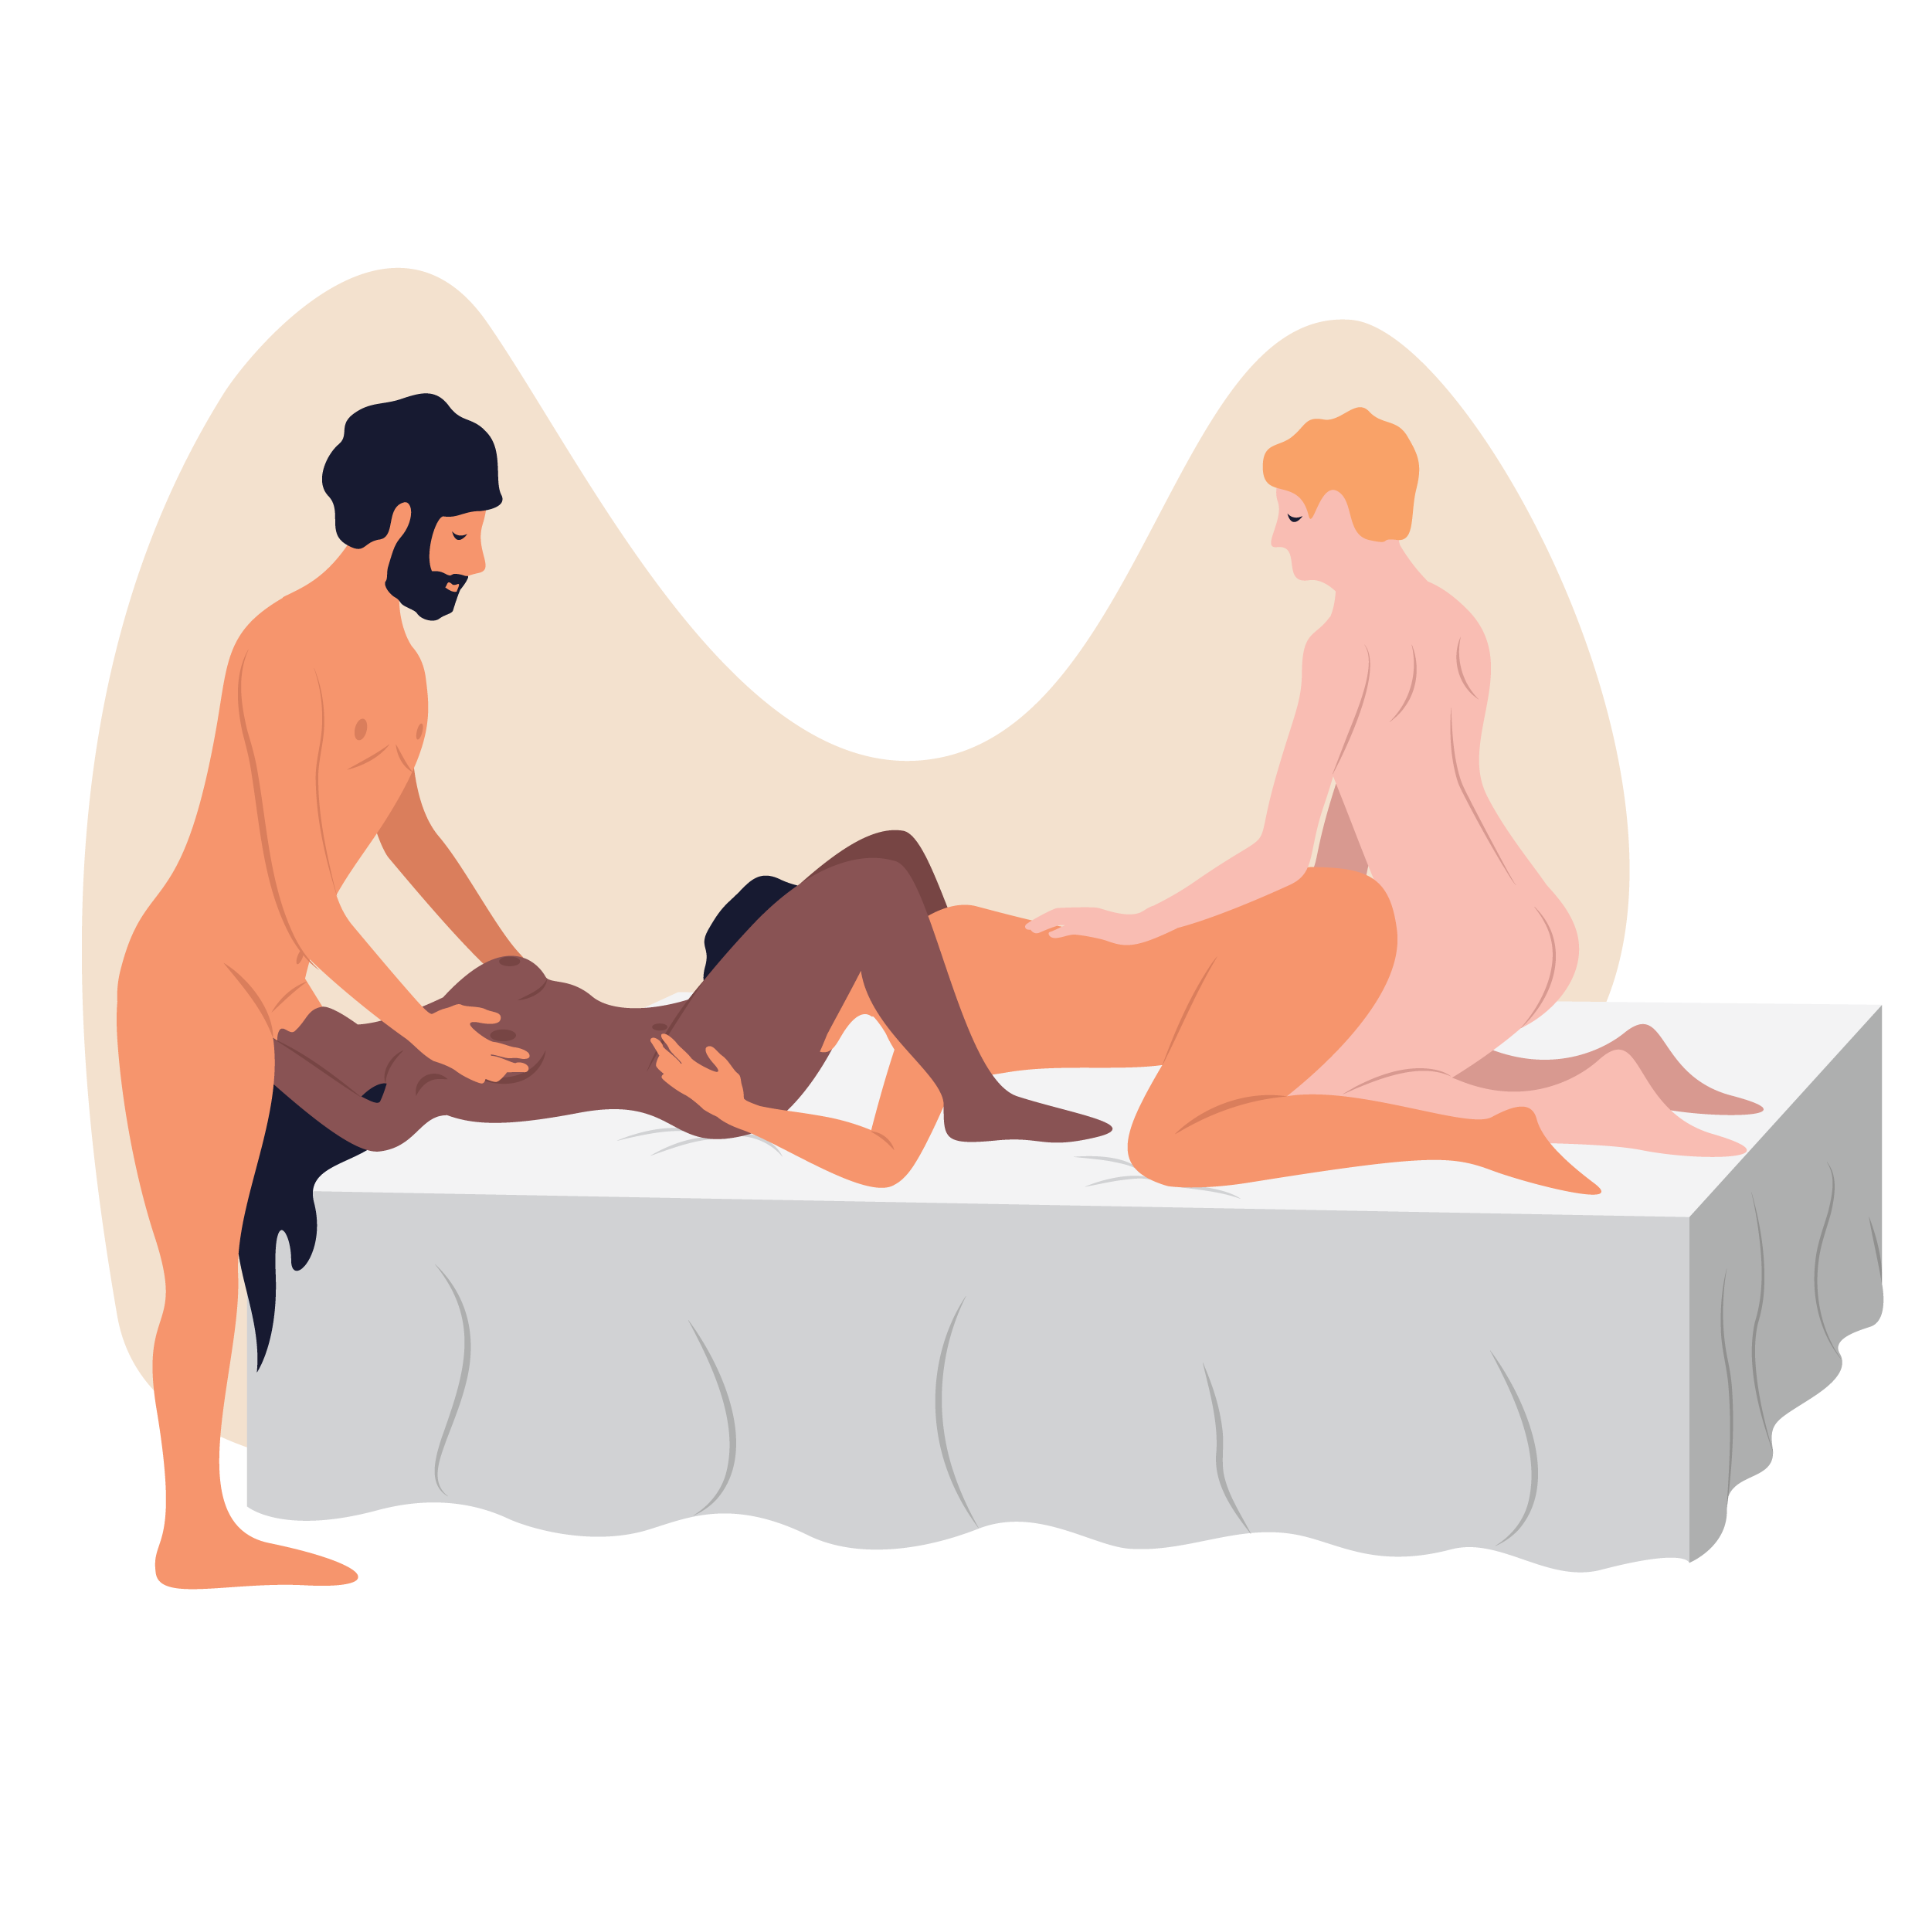 Sex Positions For Swingers - 11 Foursome Sex Positions for Double the Pleasure and Fun